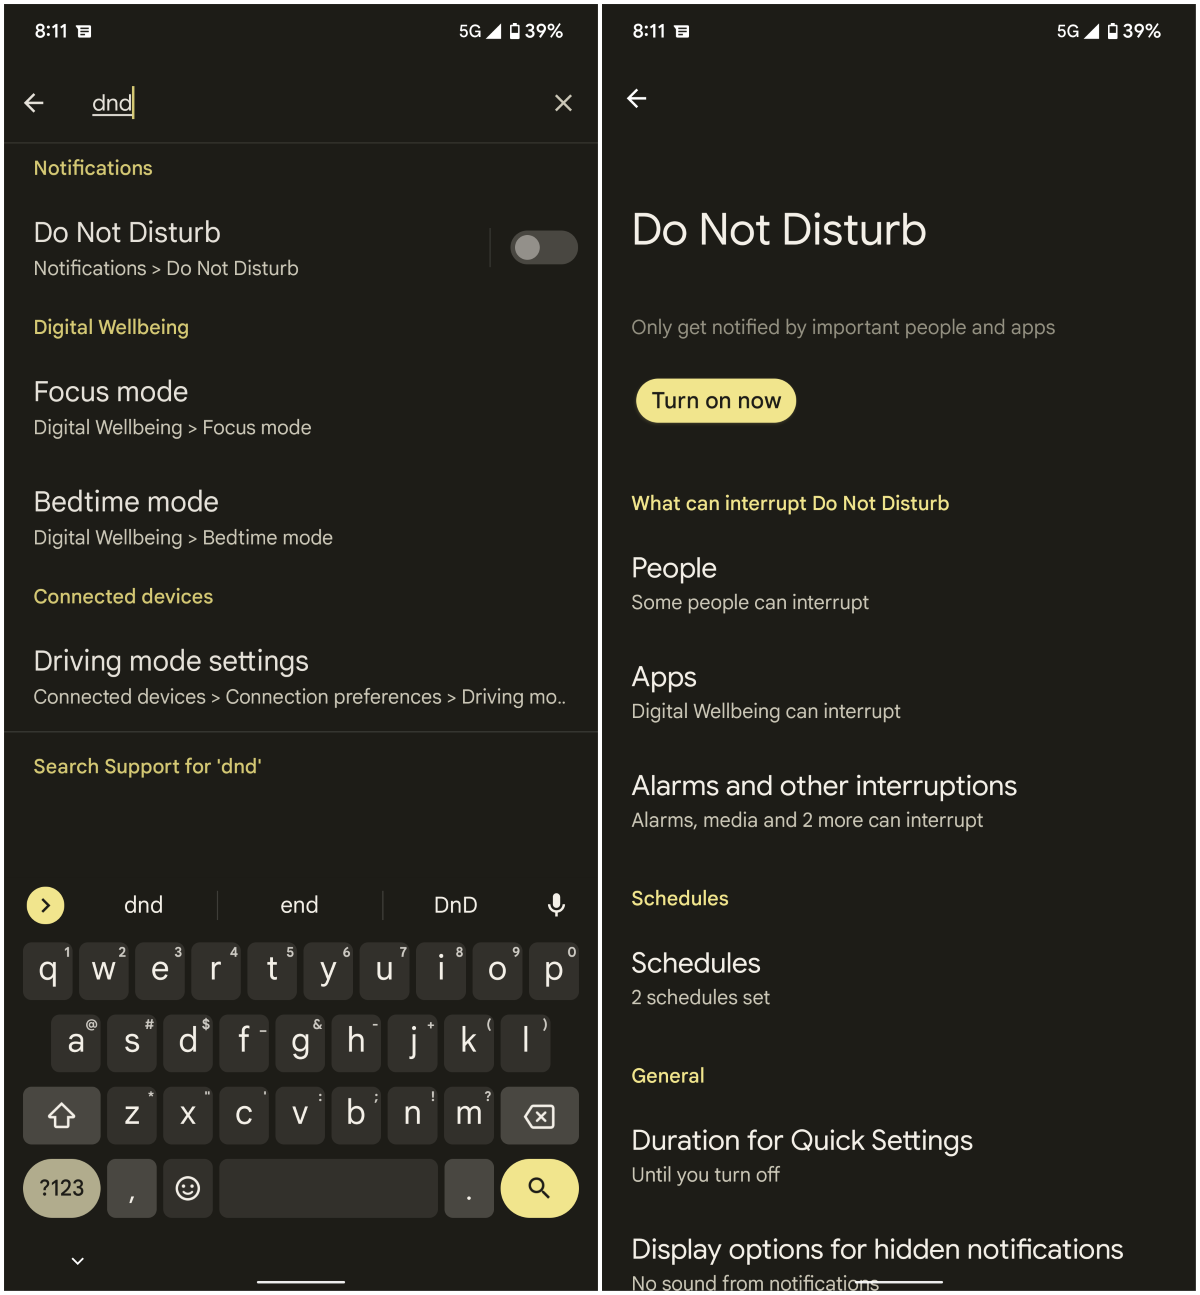 Configure Do Not Disturb (DND) in Android